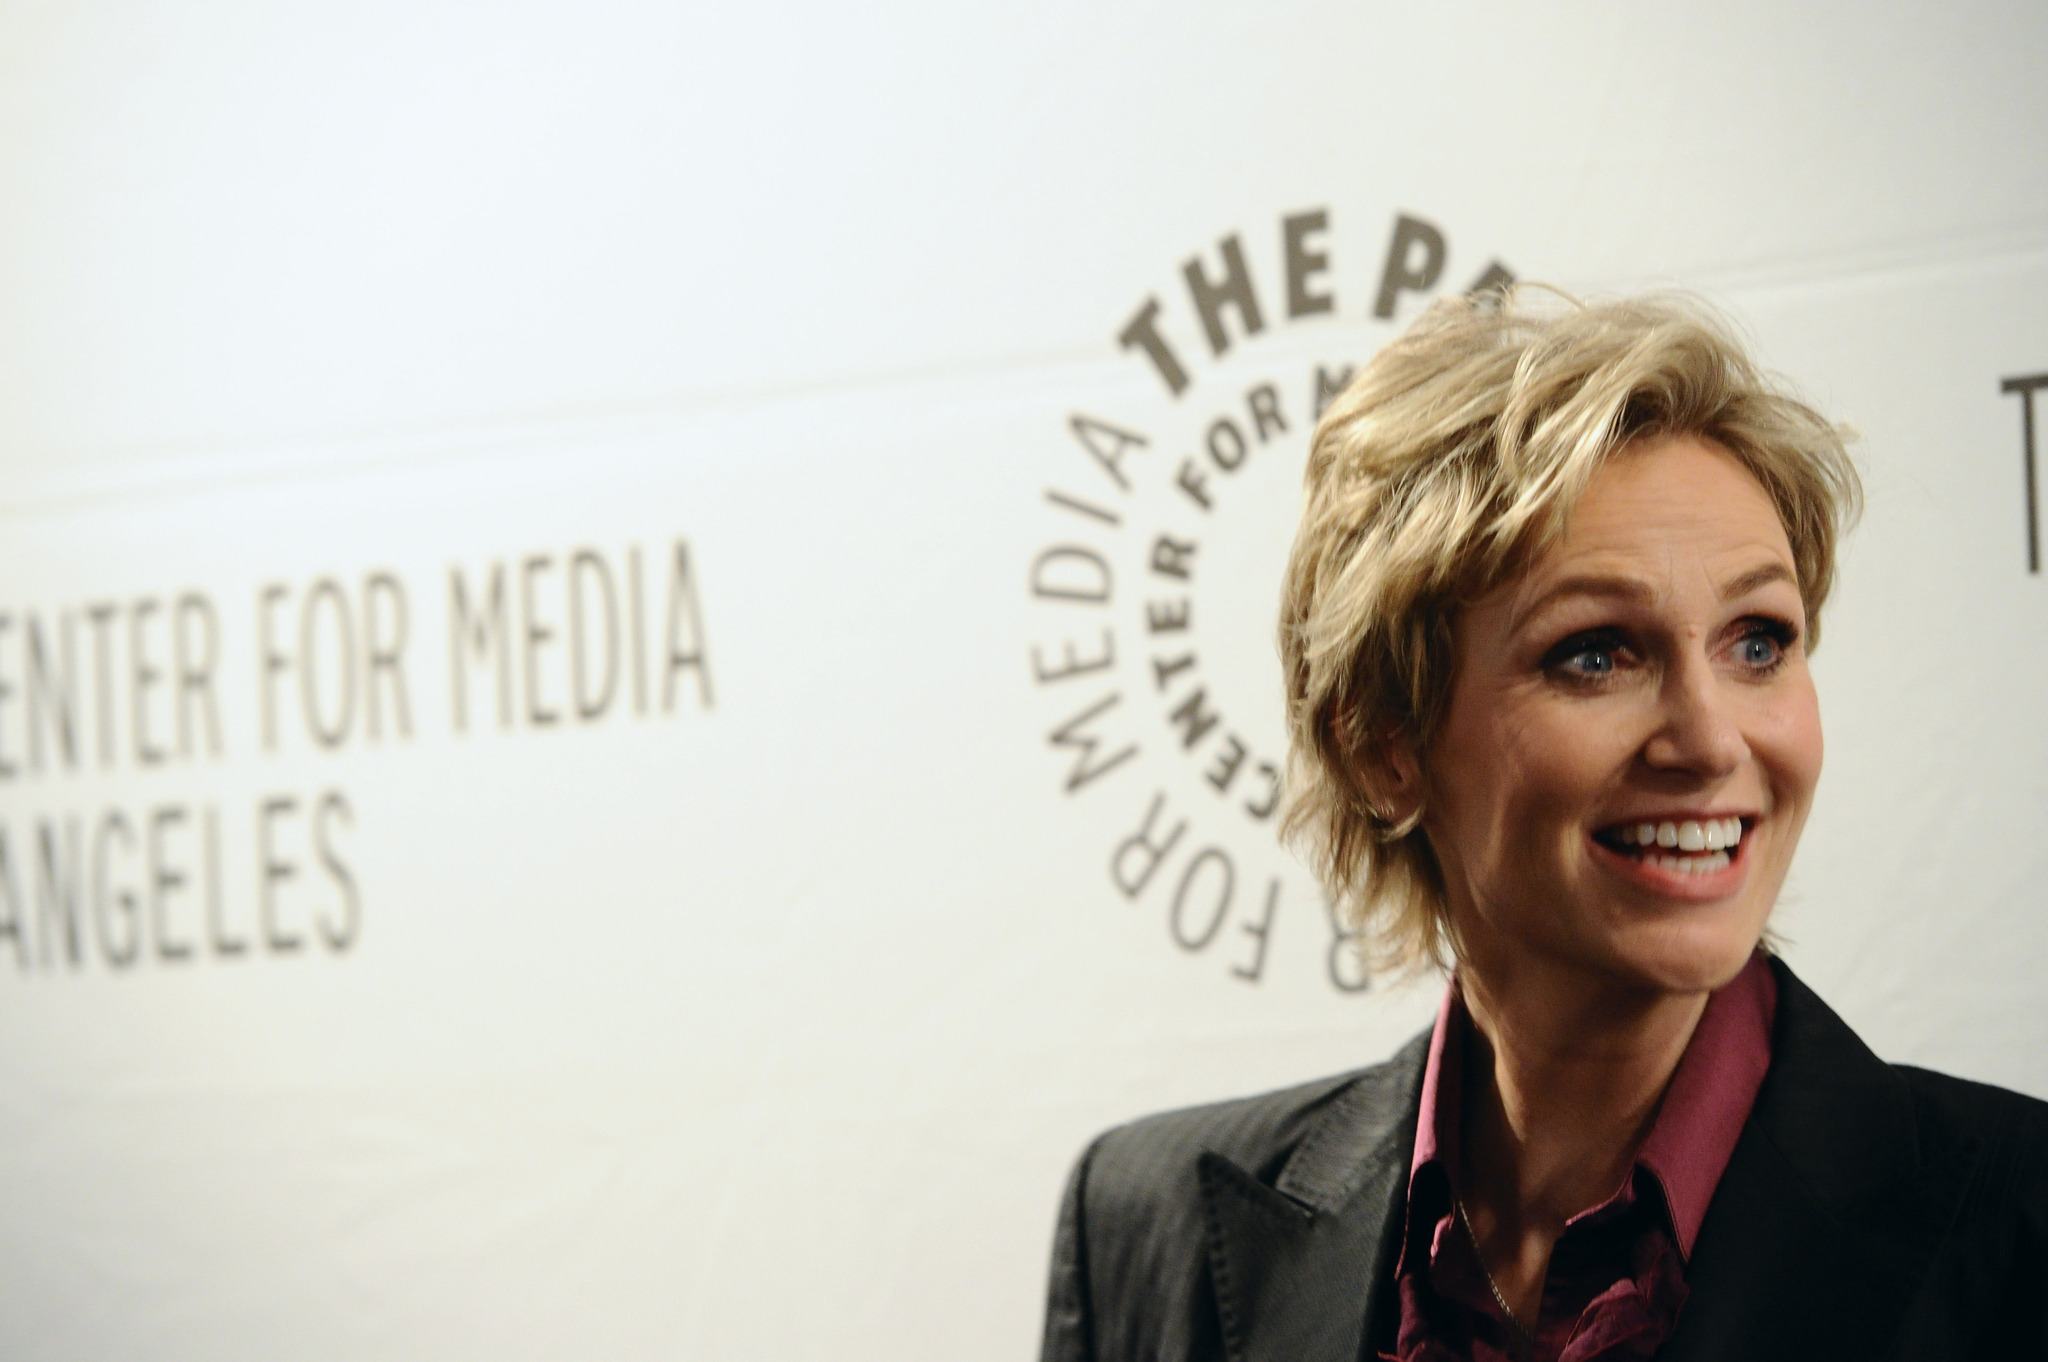 Jane Lynch at event of Glee (2009)